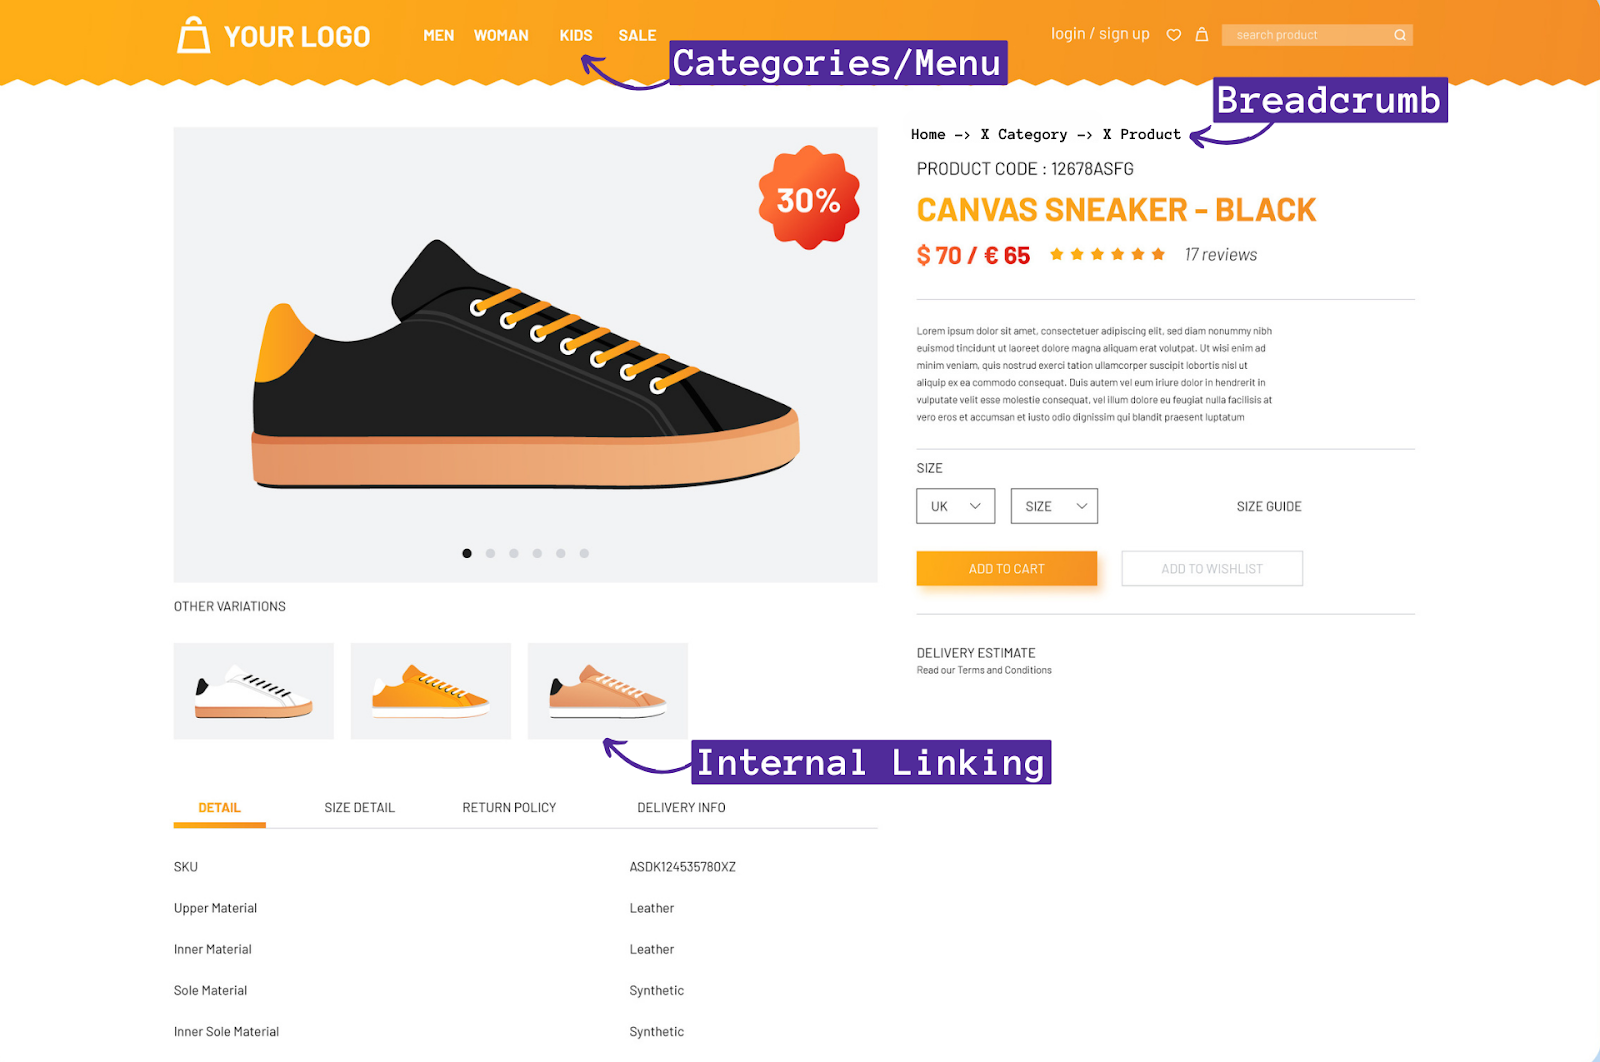 An eCommerce product page layout with annotations on SEO elements like breadcrumb navigation and internal linking